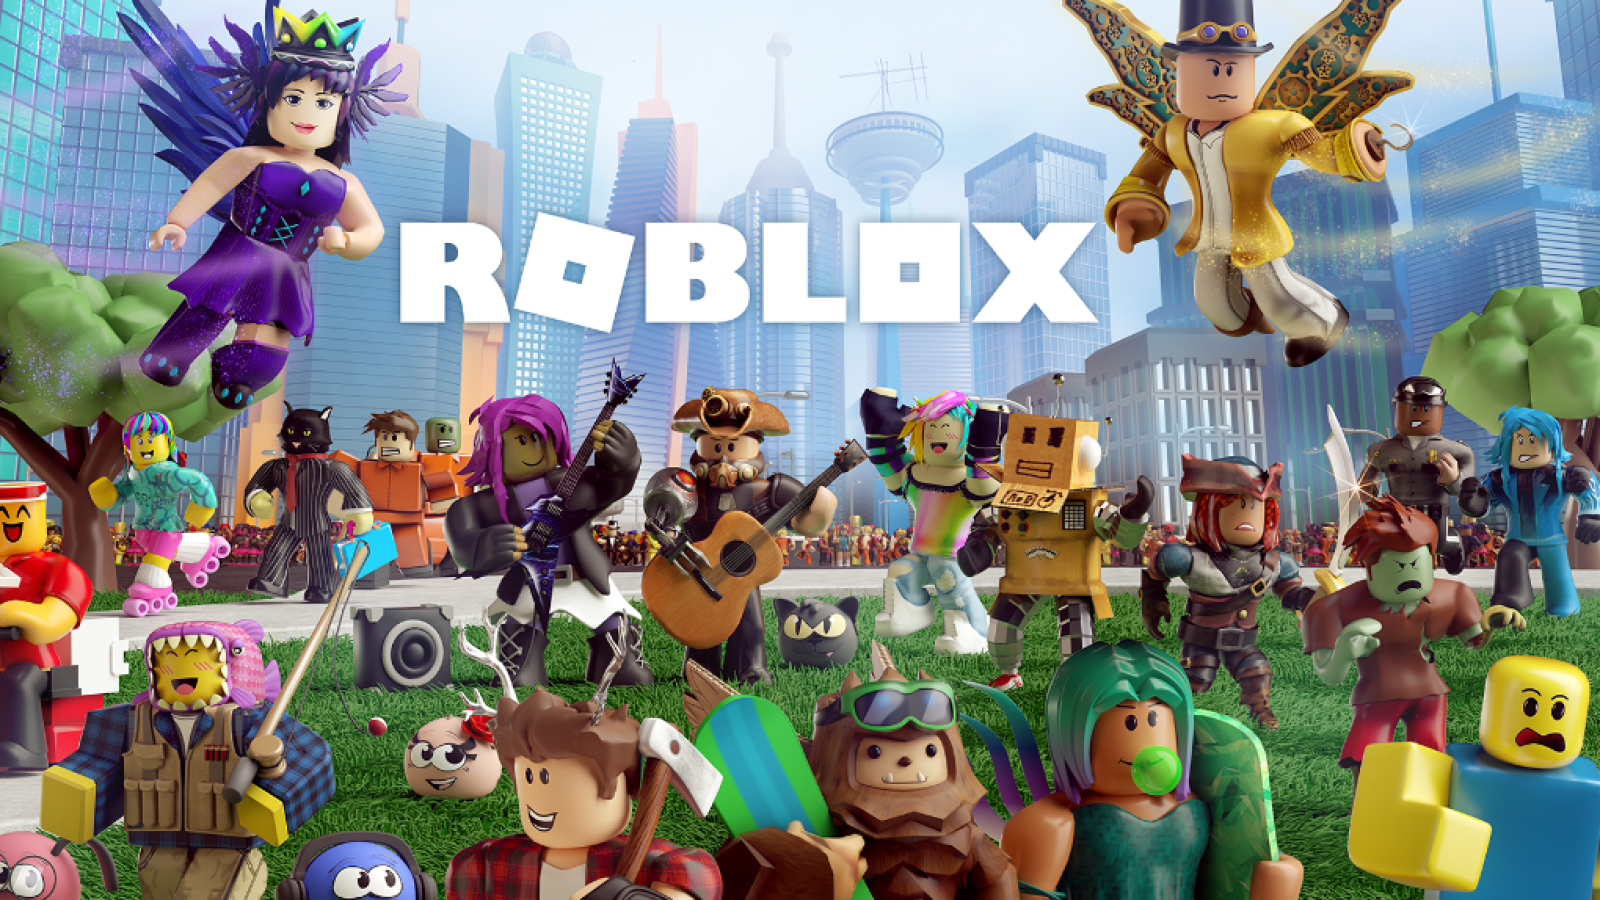 Icamp Online Roblox Classes For Kids - how to play multiplayer on roblox studio